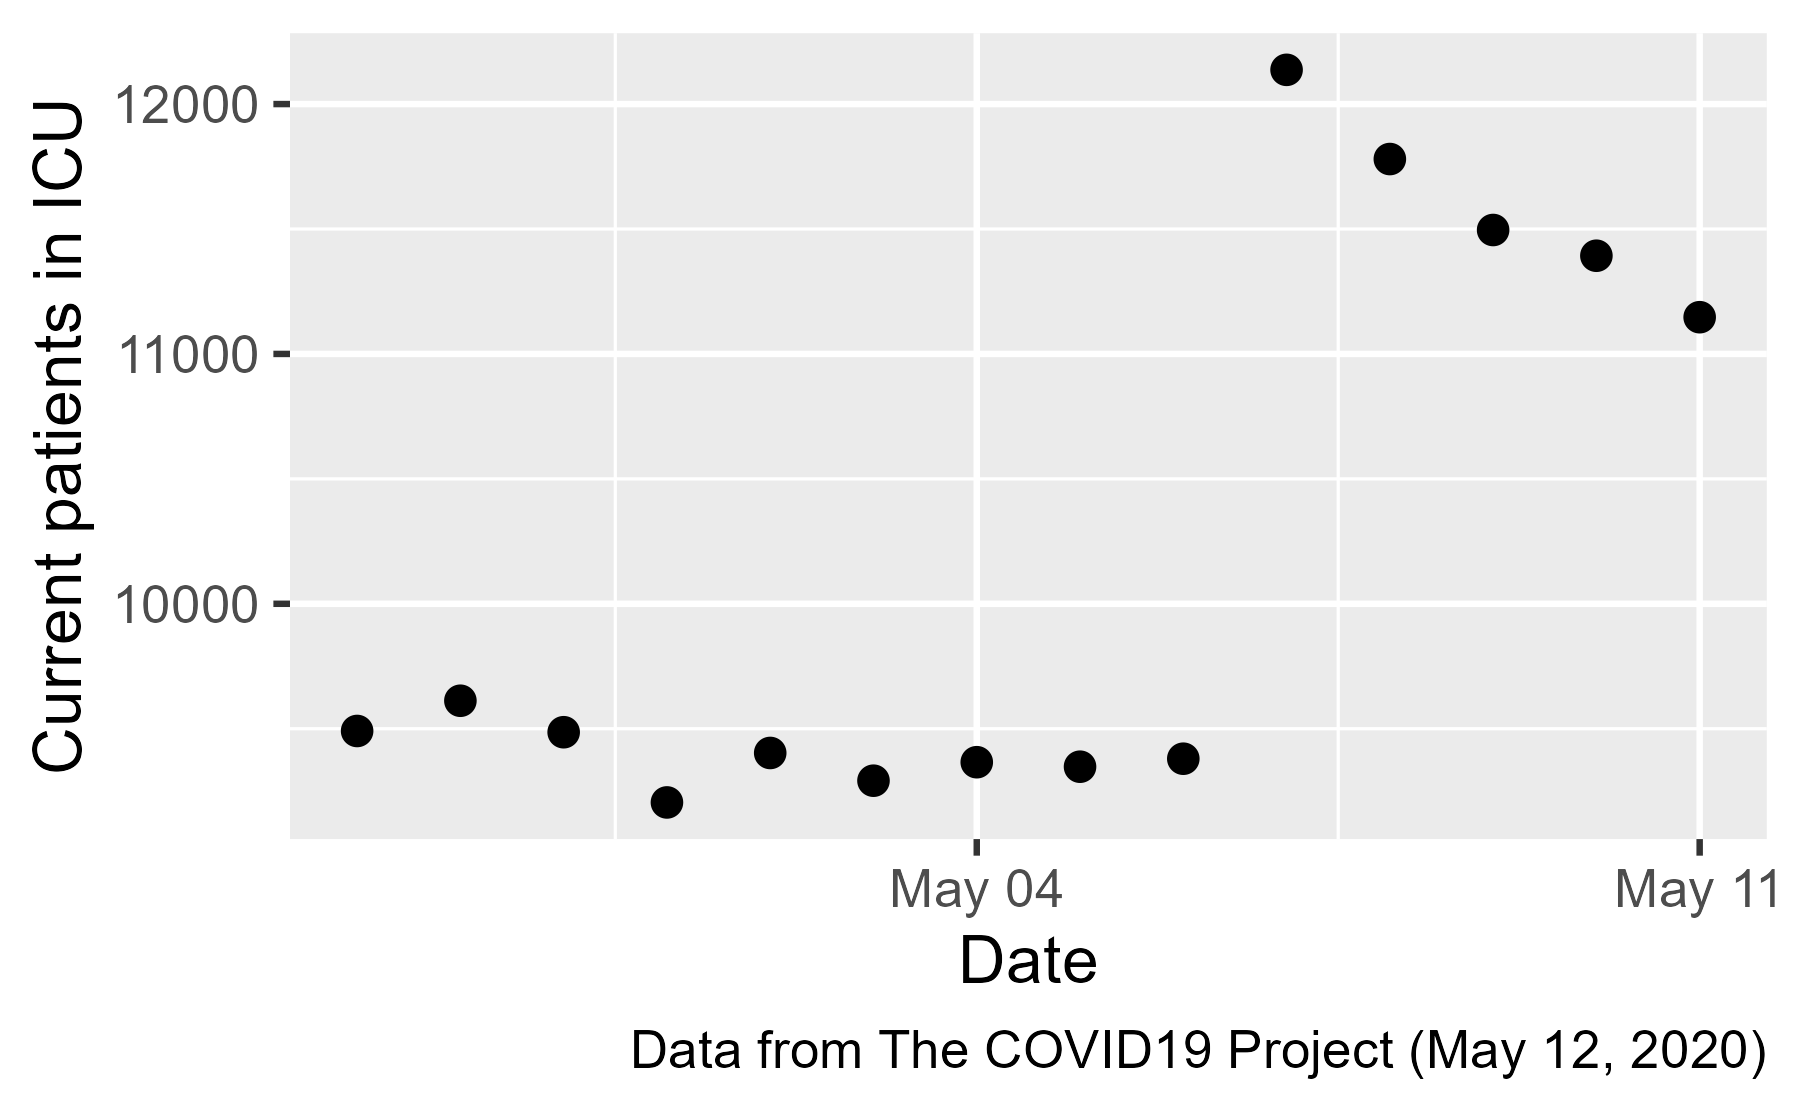 A plot showing the total number of Covid-19 patients in ICU beds from April 28, 2020 to May 11, 2020. The numbers hover around 9000 and then rapidly jump to over 12000 after May 7.